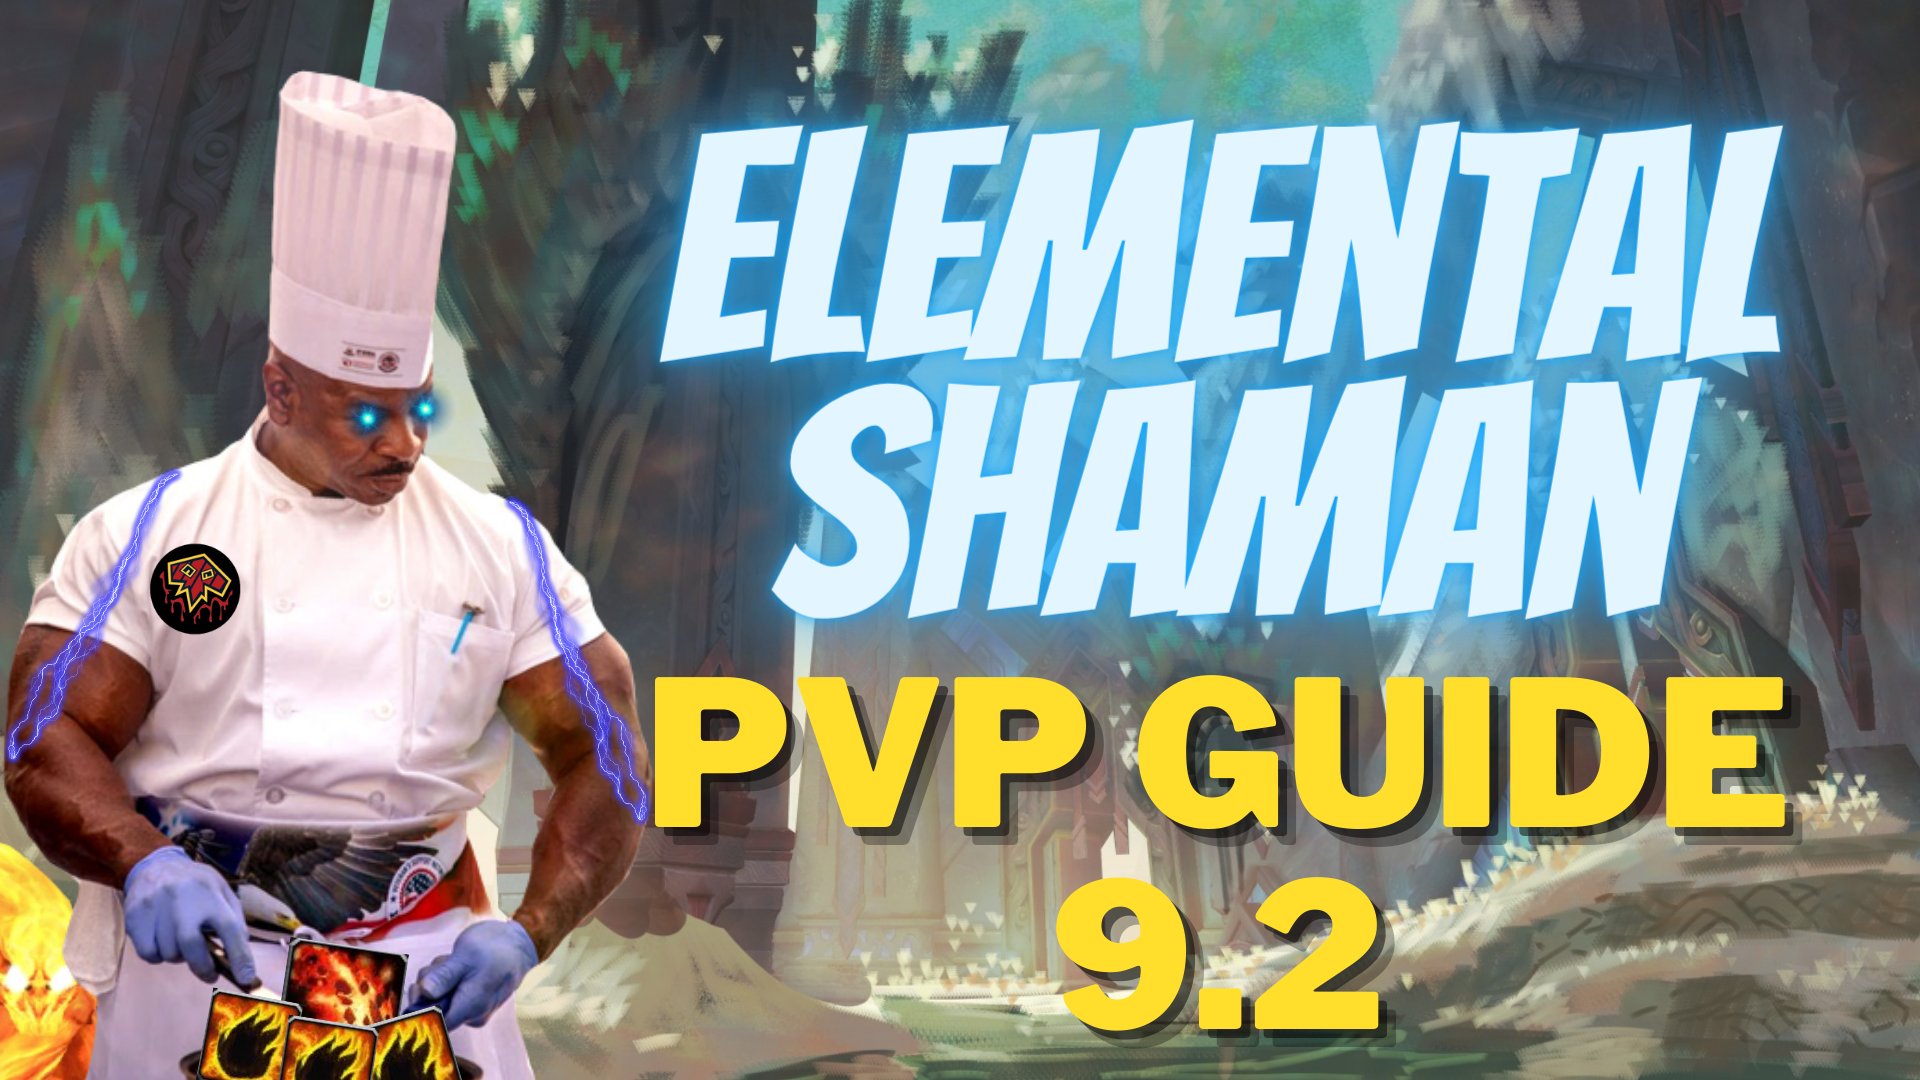 My Elemental Shaman PvP Guide for 9.2. 